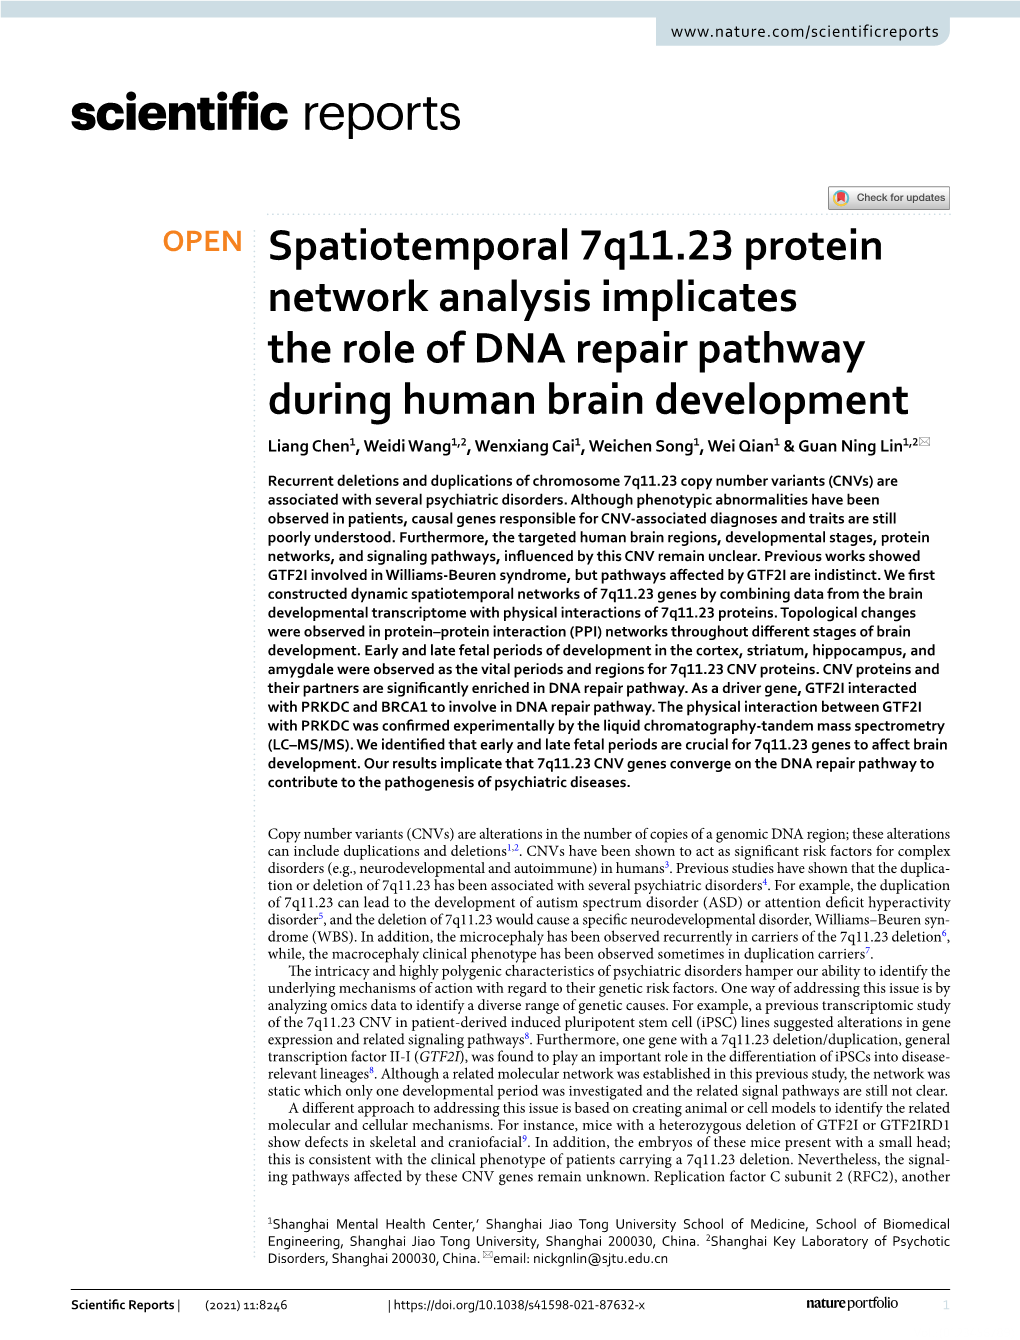 Spatiotemporal 7Q11.23 Protein Network Analysis Implicates the Role of DNA Repair Pathway During Human Brain Development